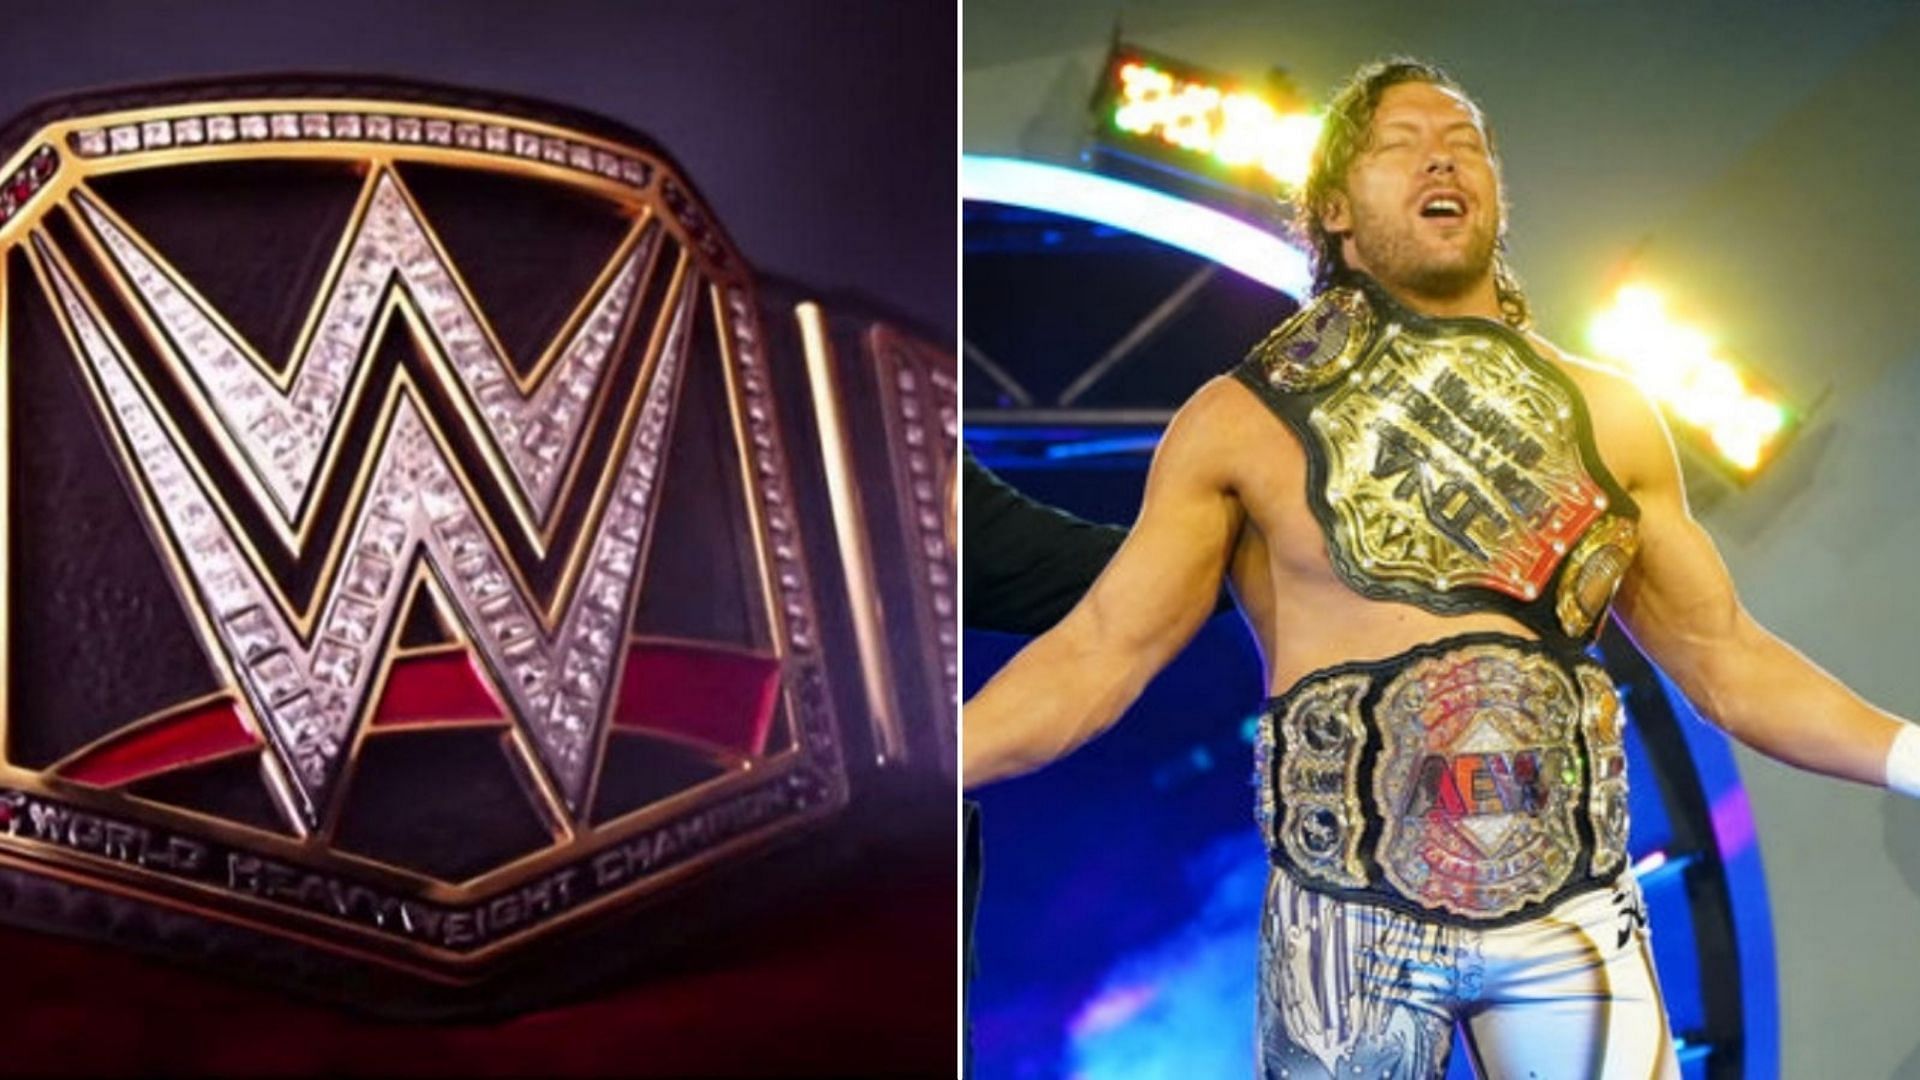 The Belt Collector was never considered WWE Champion material during his time with WWE.